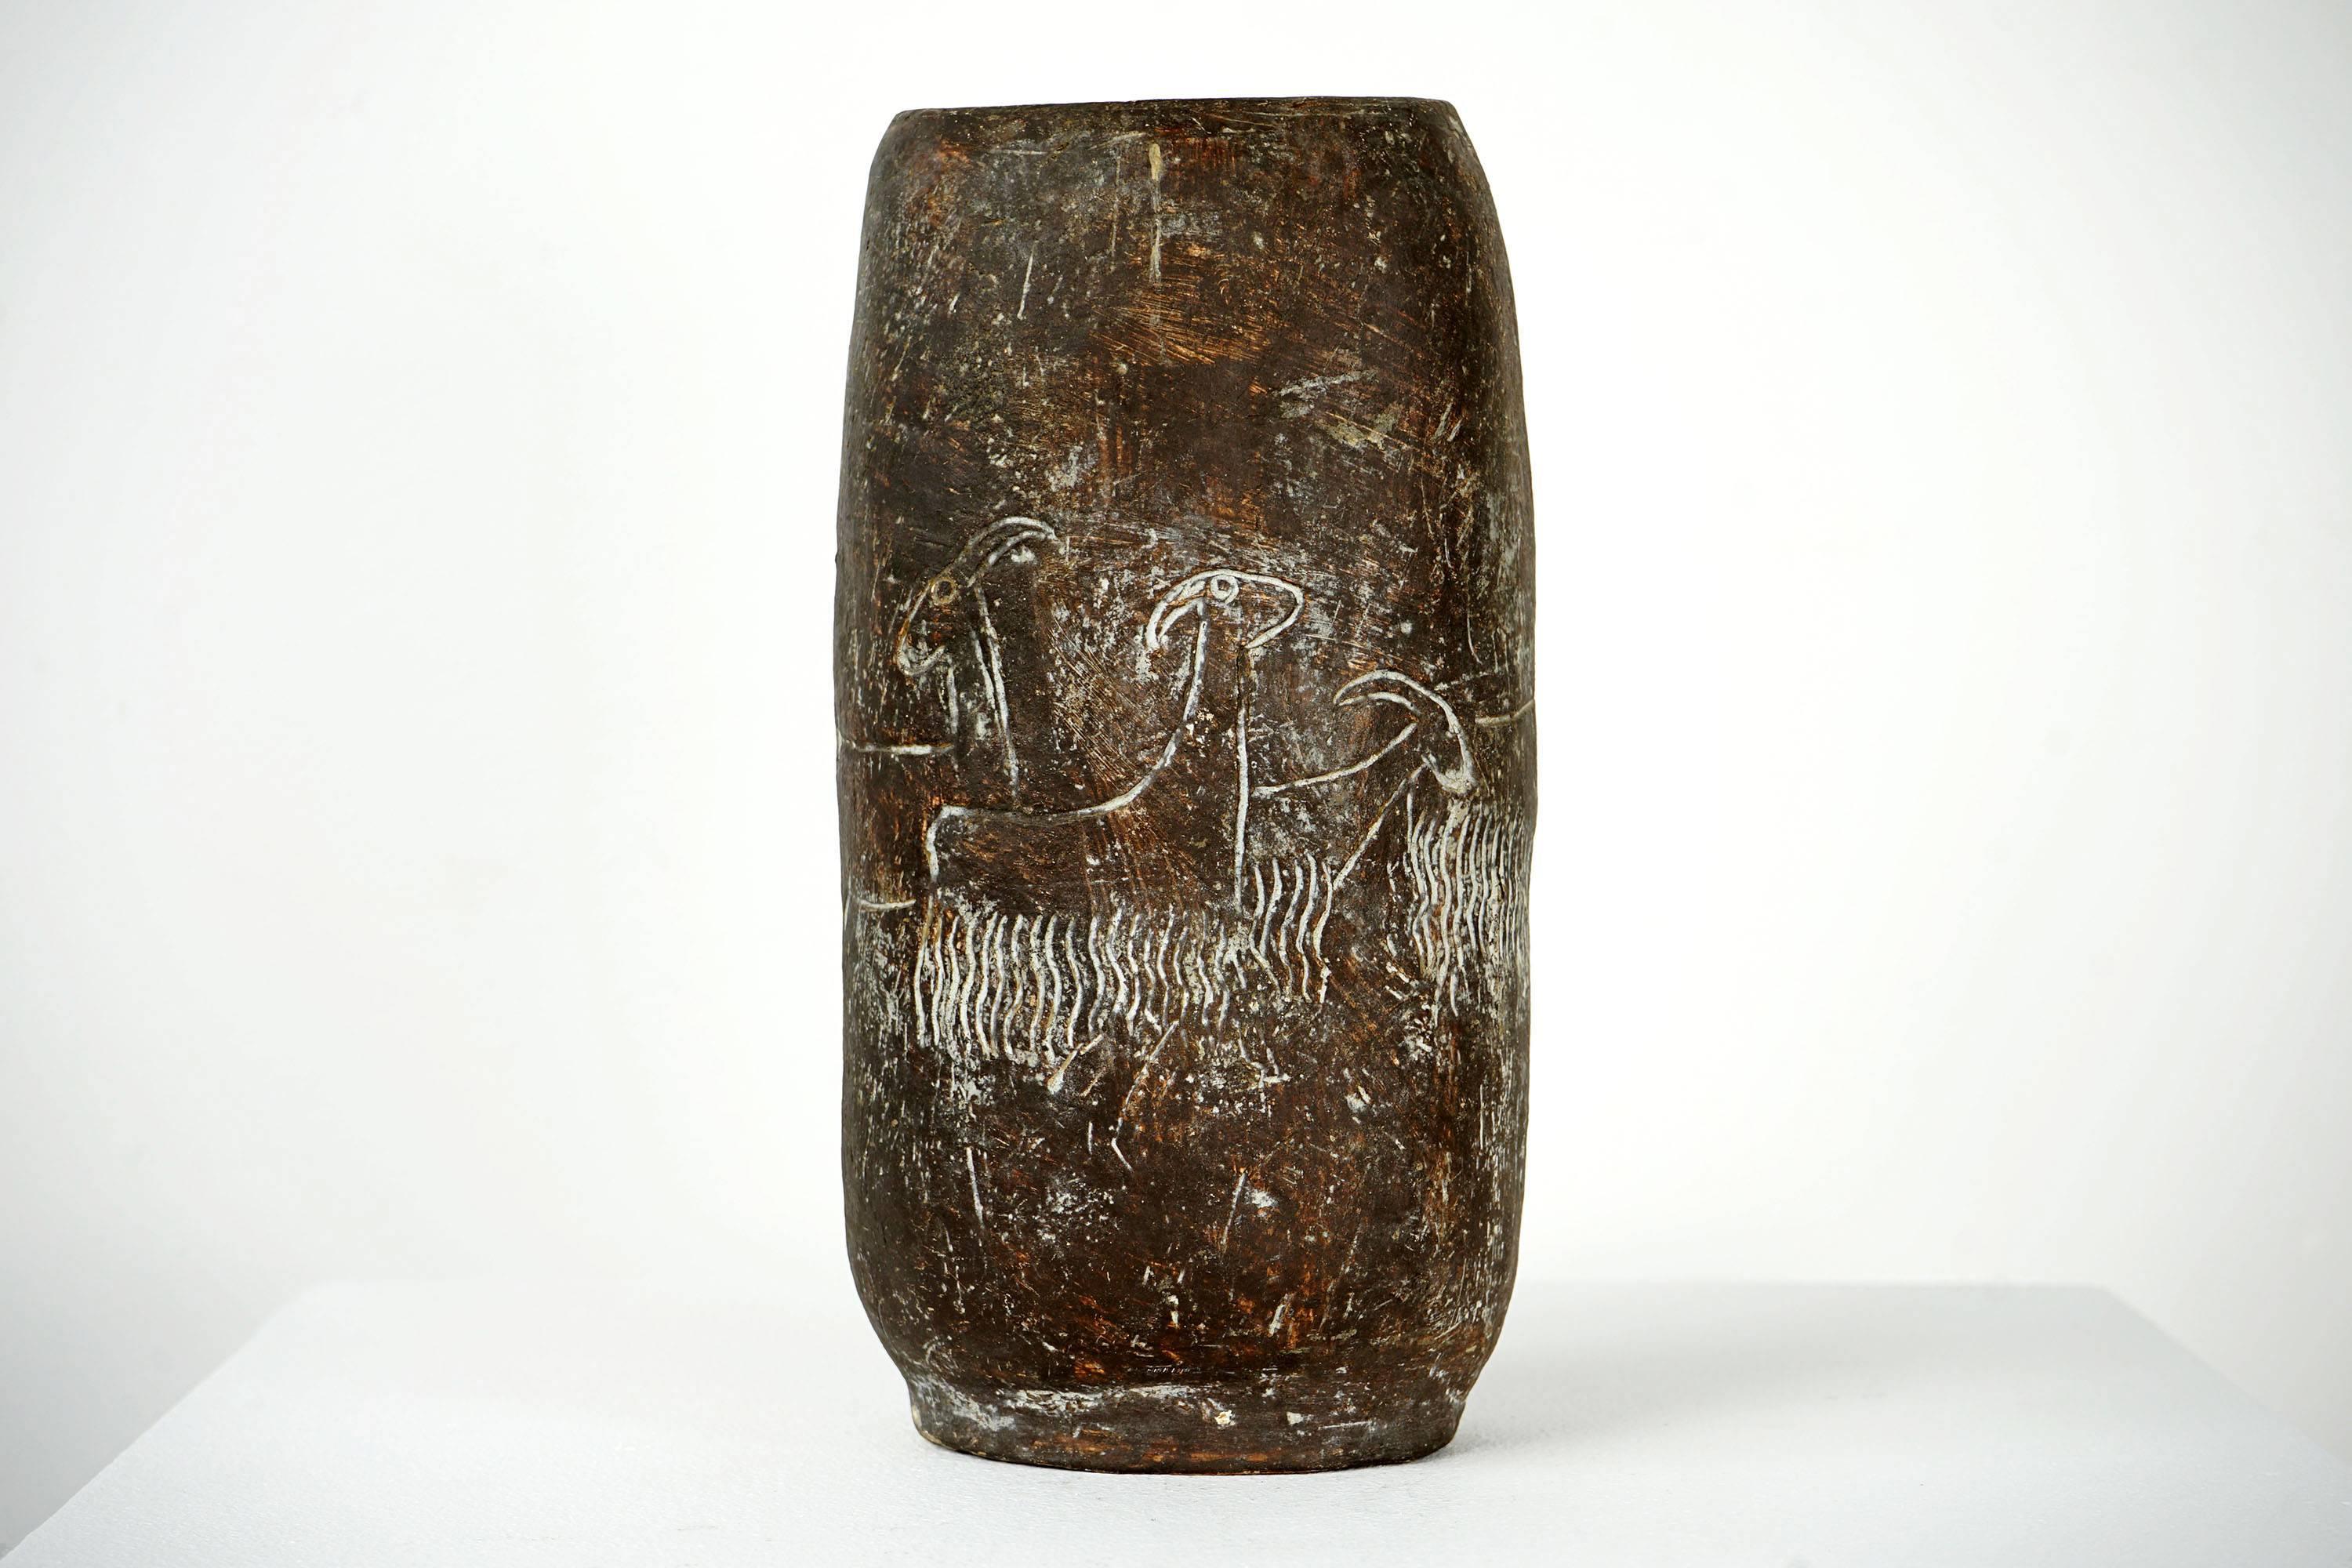 Karen Karnes is a celebrity of pottery. This ceramic vessel was created in the 1960s. The rustic look of the ceramic is complemented by a fine-line motif showing a shepherd and five goats. The surface structure of the vessel is plain on the inside